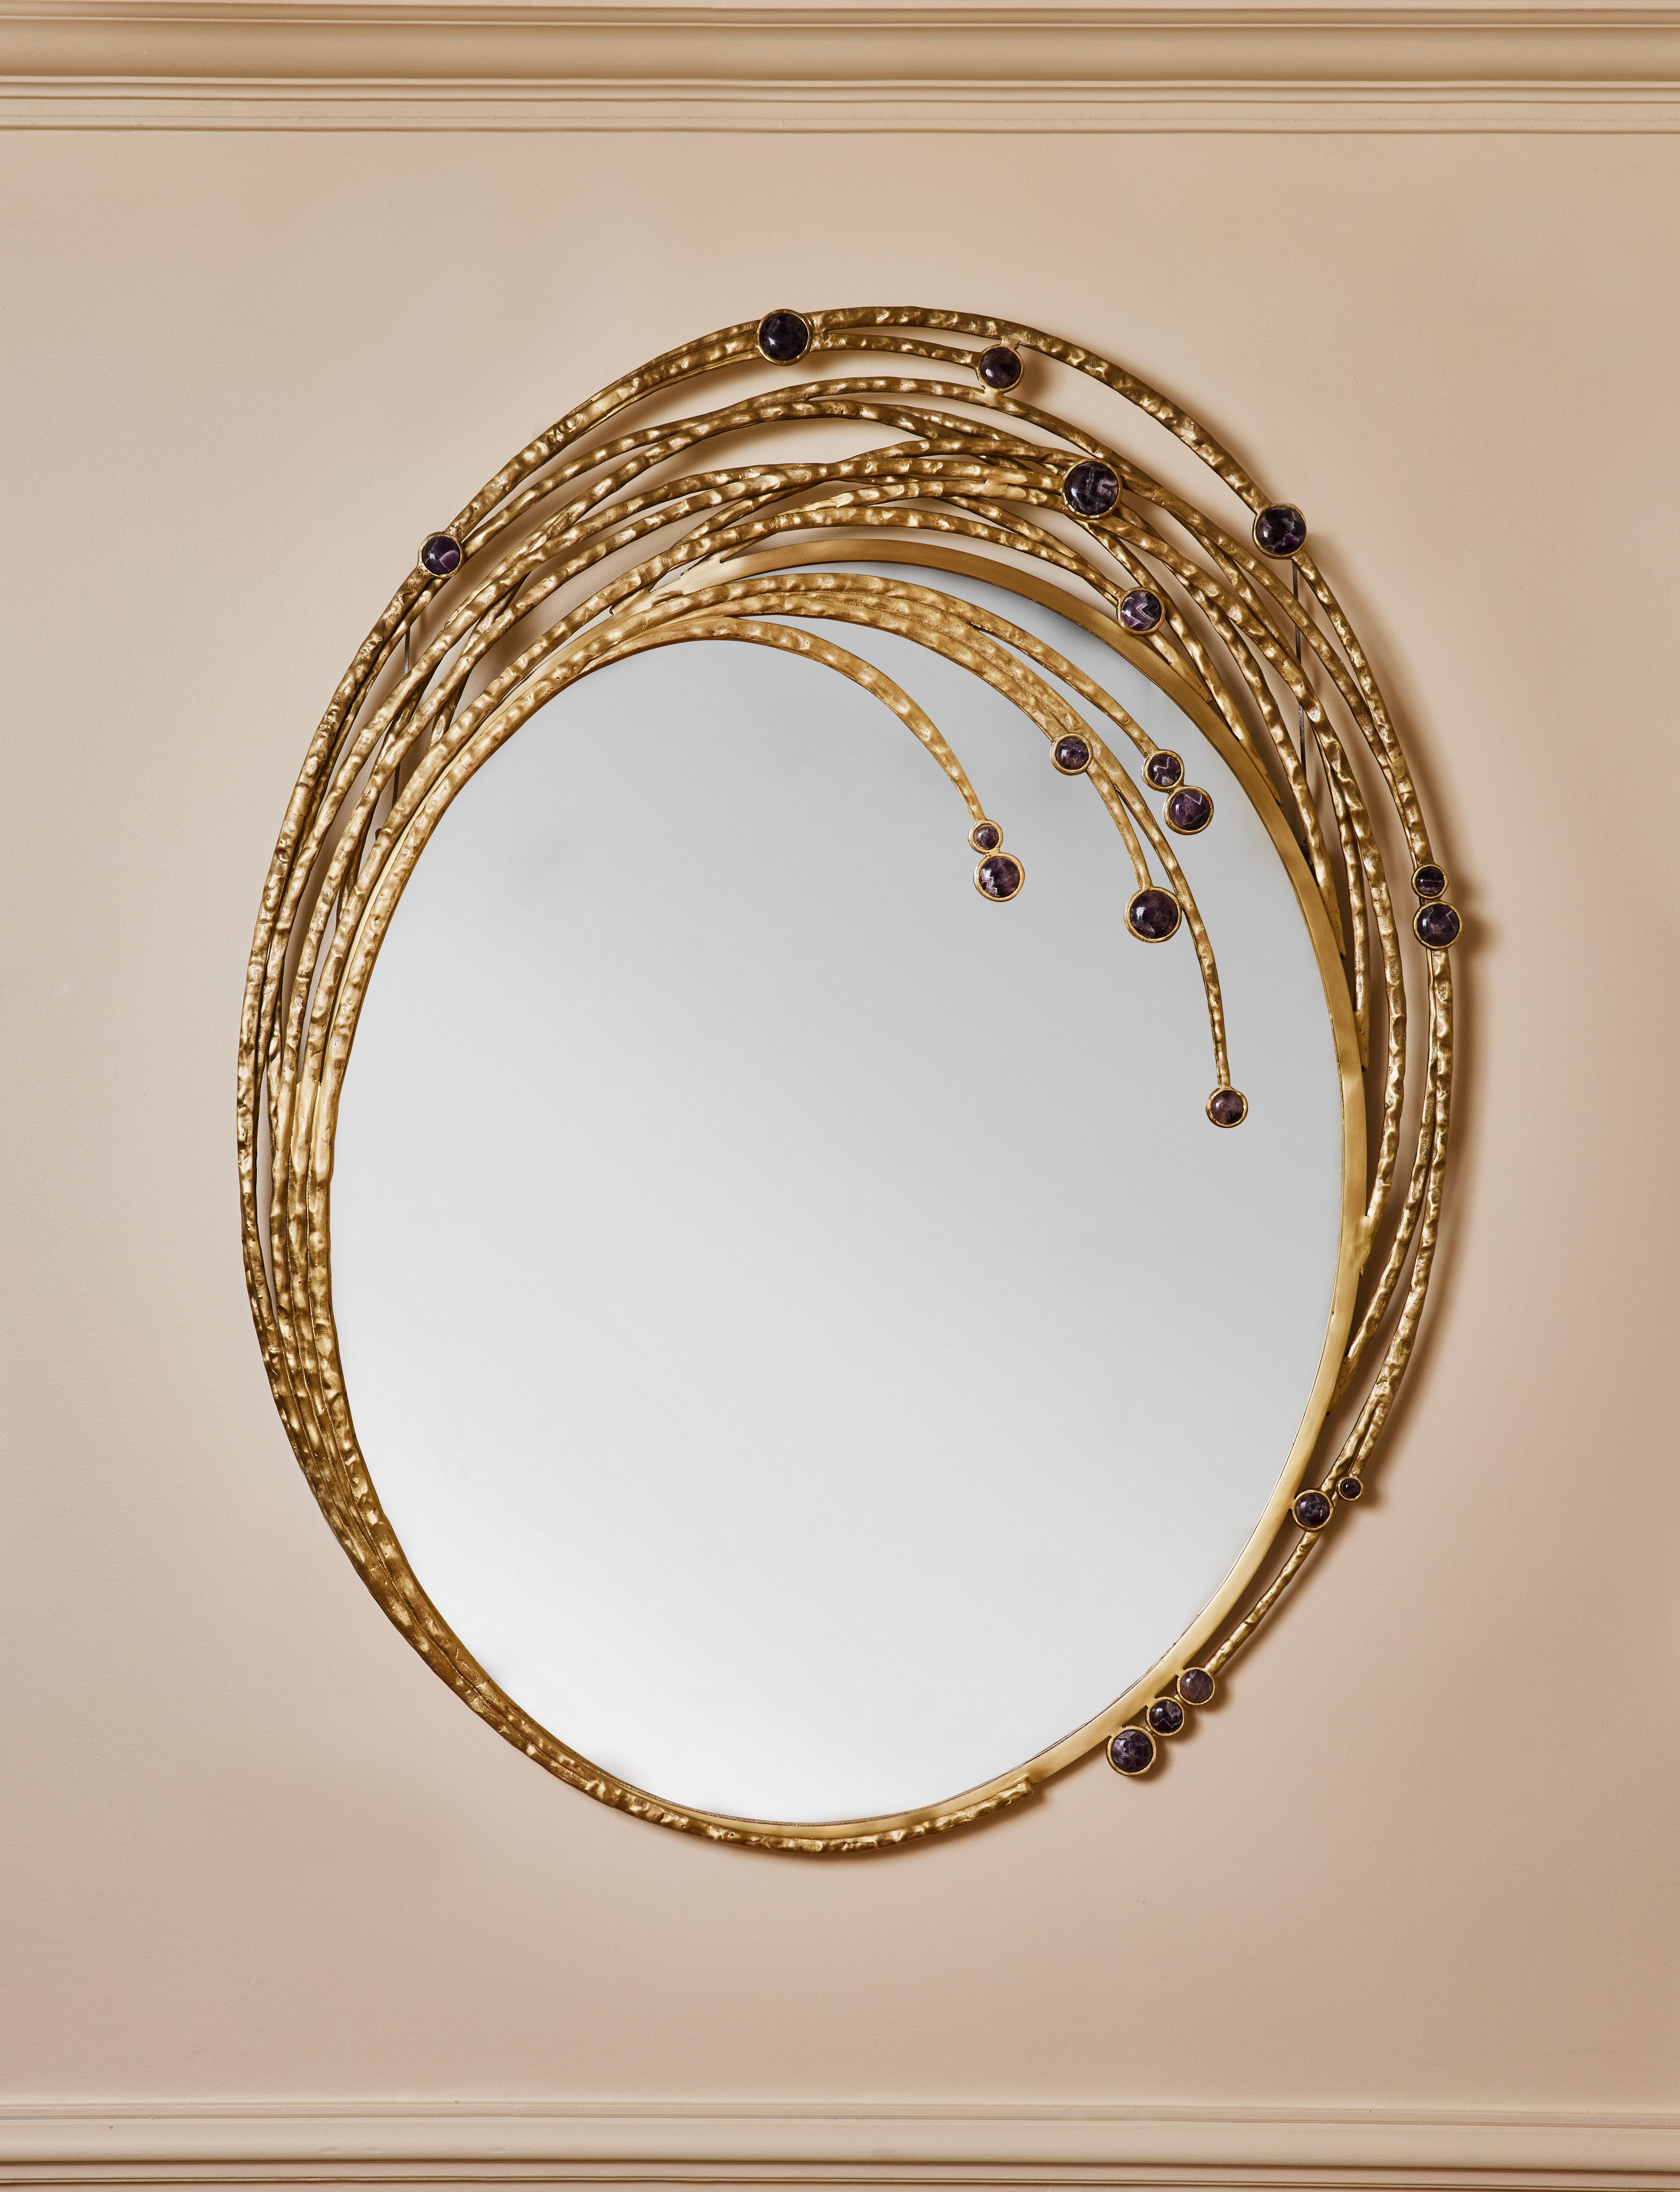 Mirror in sculpted and gilt bronze with amethysts stone inlays.
Creation by Studio Glustin.